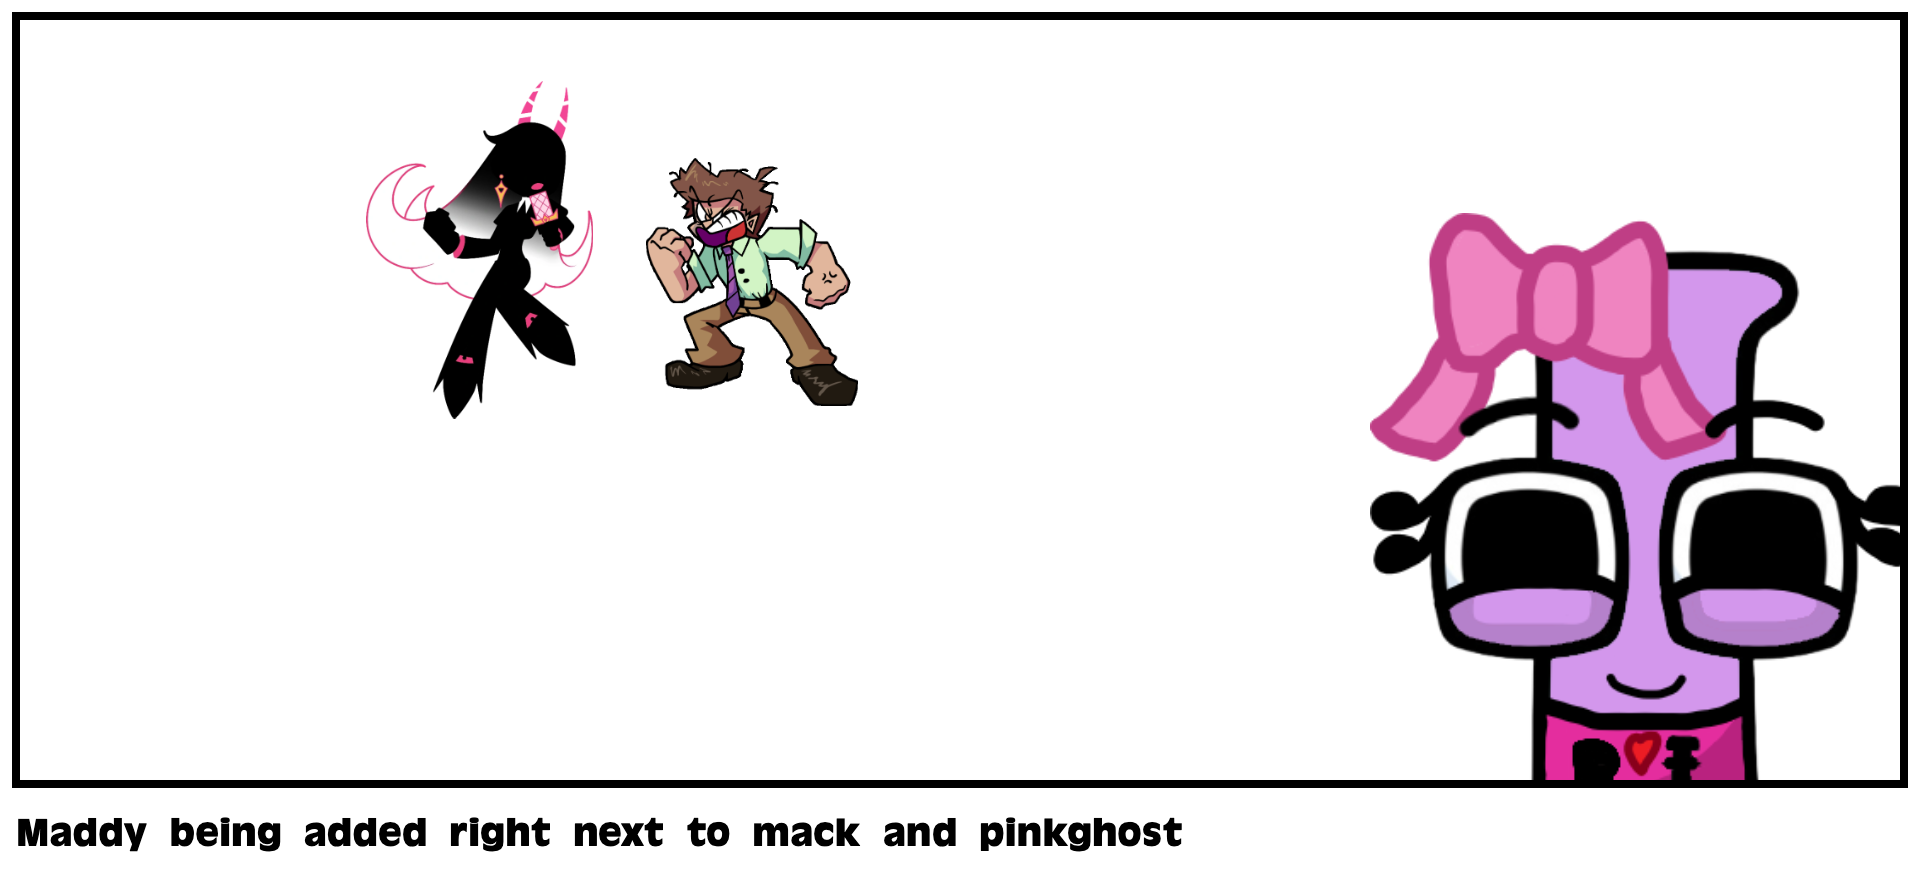 Maddy being added right next to mack and pinkghost